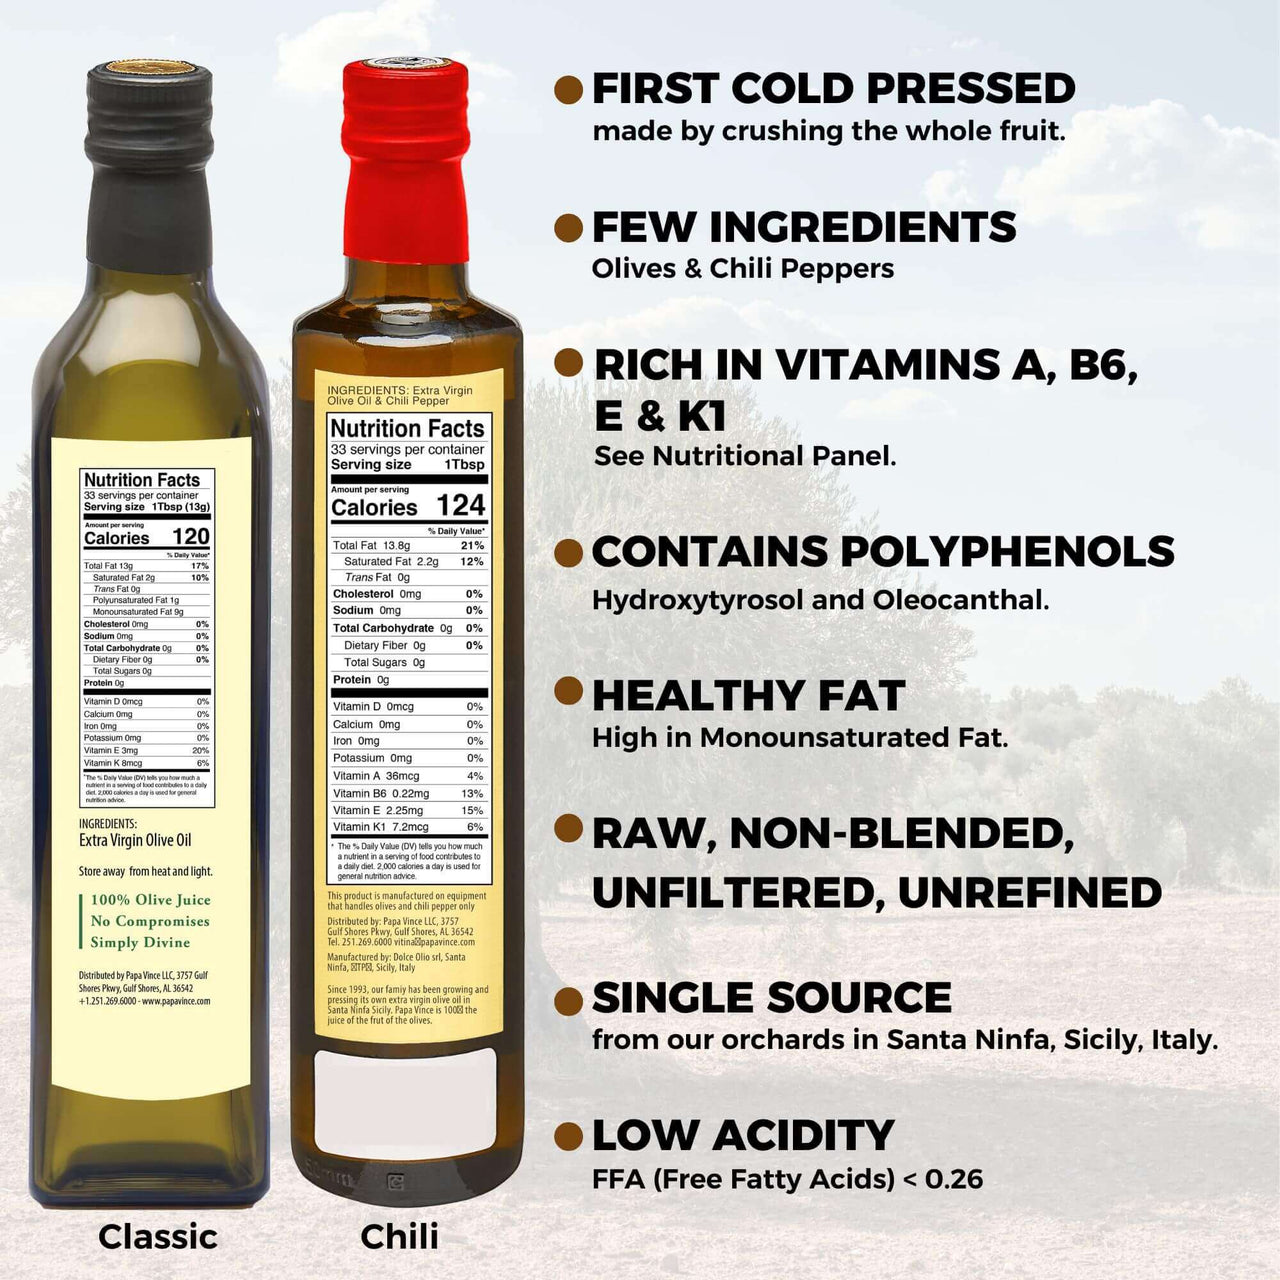 Polyphenol Rich Olive Oil Extra Virgin from Sicily, Italy. Classic & Chili Pepper Fused Olive Oil. Agrumato, Unblended, First Cold Pressed, Single Sourced, Unfiltered, Unrefined, Robust, Mild hot finish, High in Antioxidants EVOO Gift Set - Papa Vince